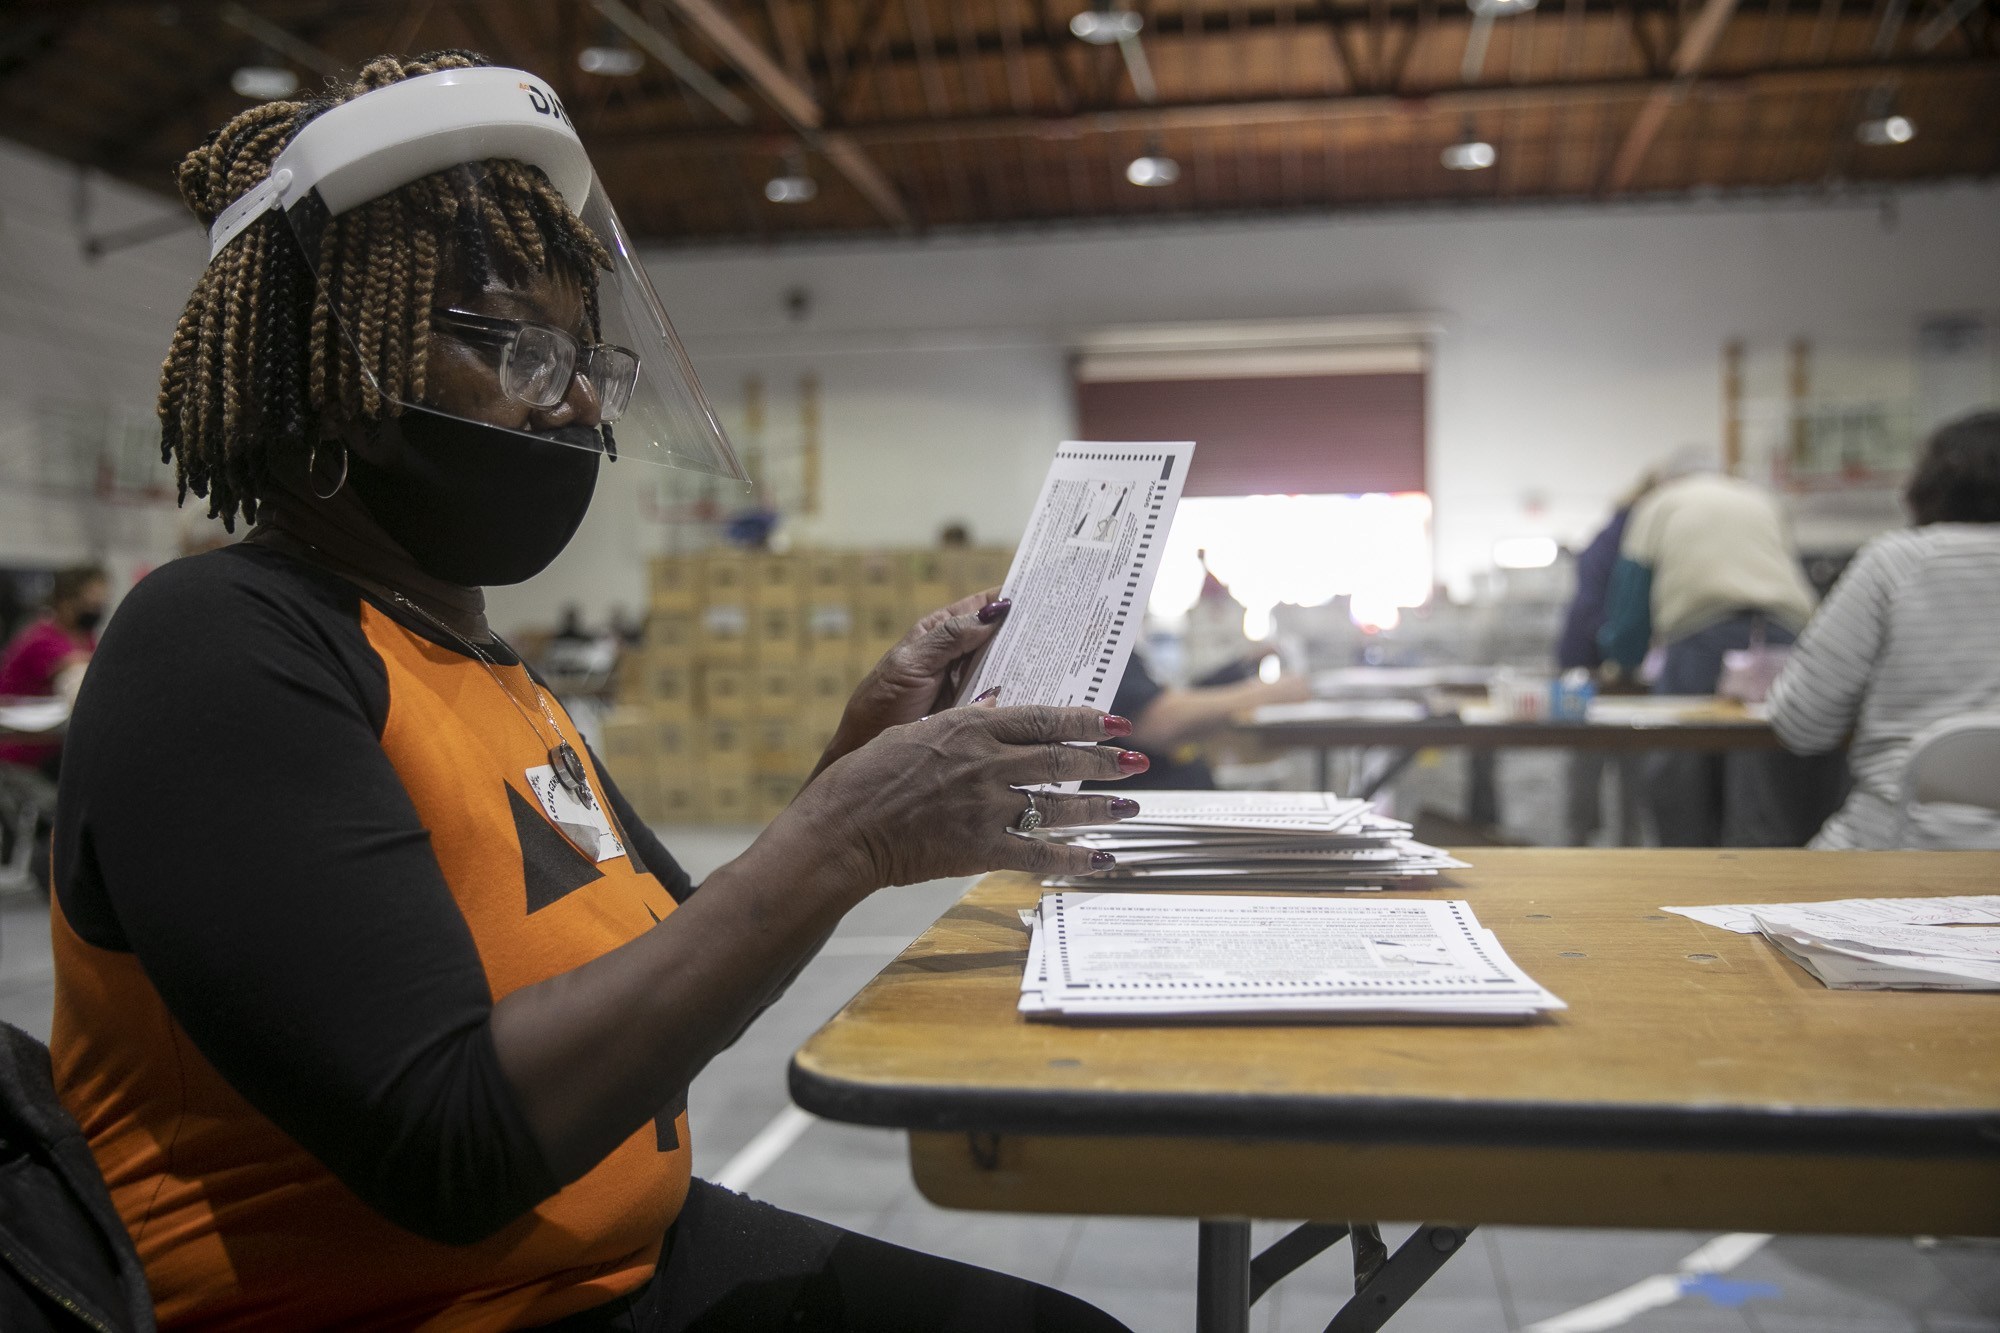 A woman wearing a face shield, mask, and orange shirt is seated at a table sorting through stacks of paper ballots in a large room. It's a scene straight out of Berkeley Journalism, with others diligently working at different tables in the background.